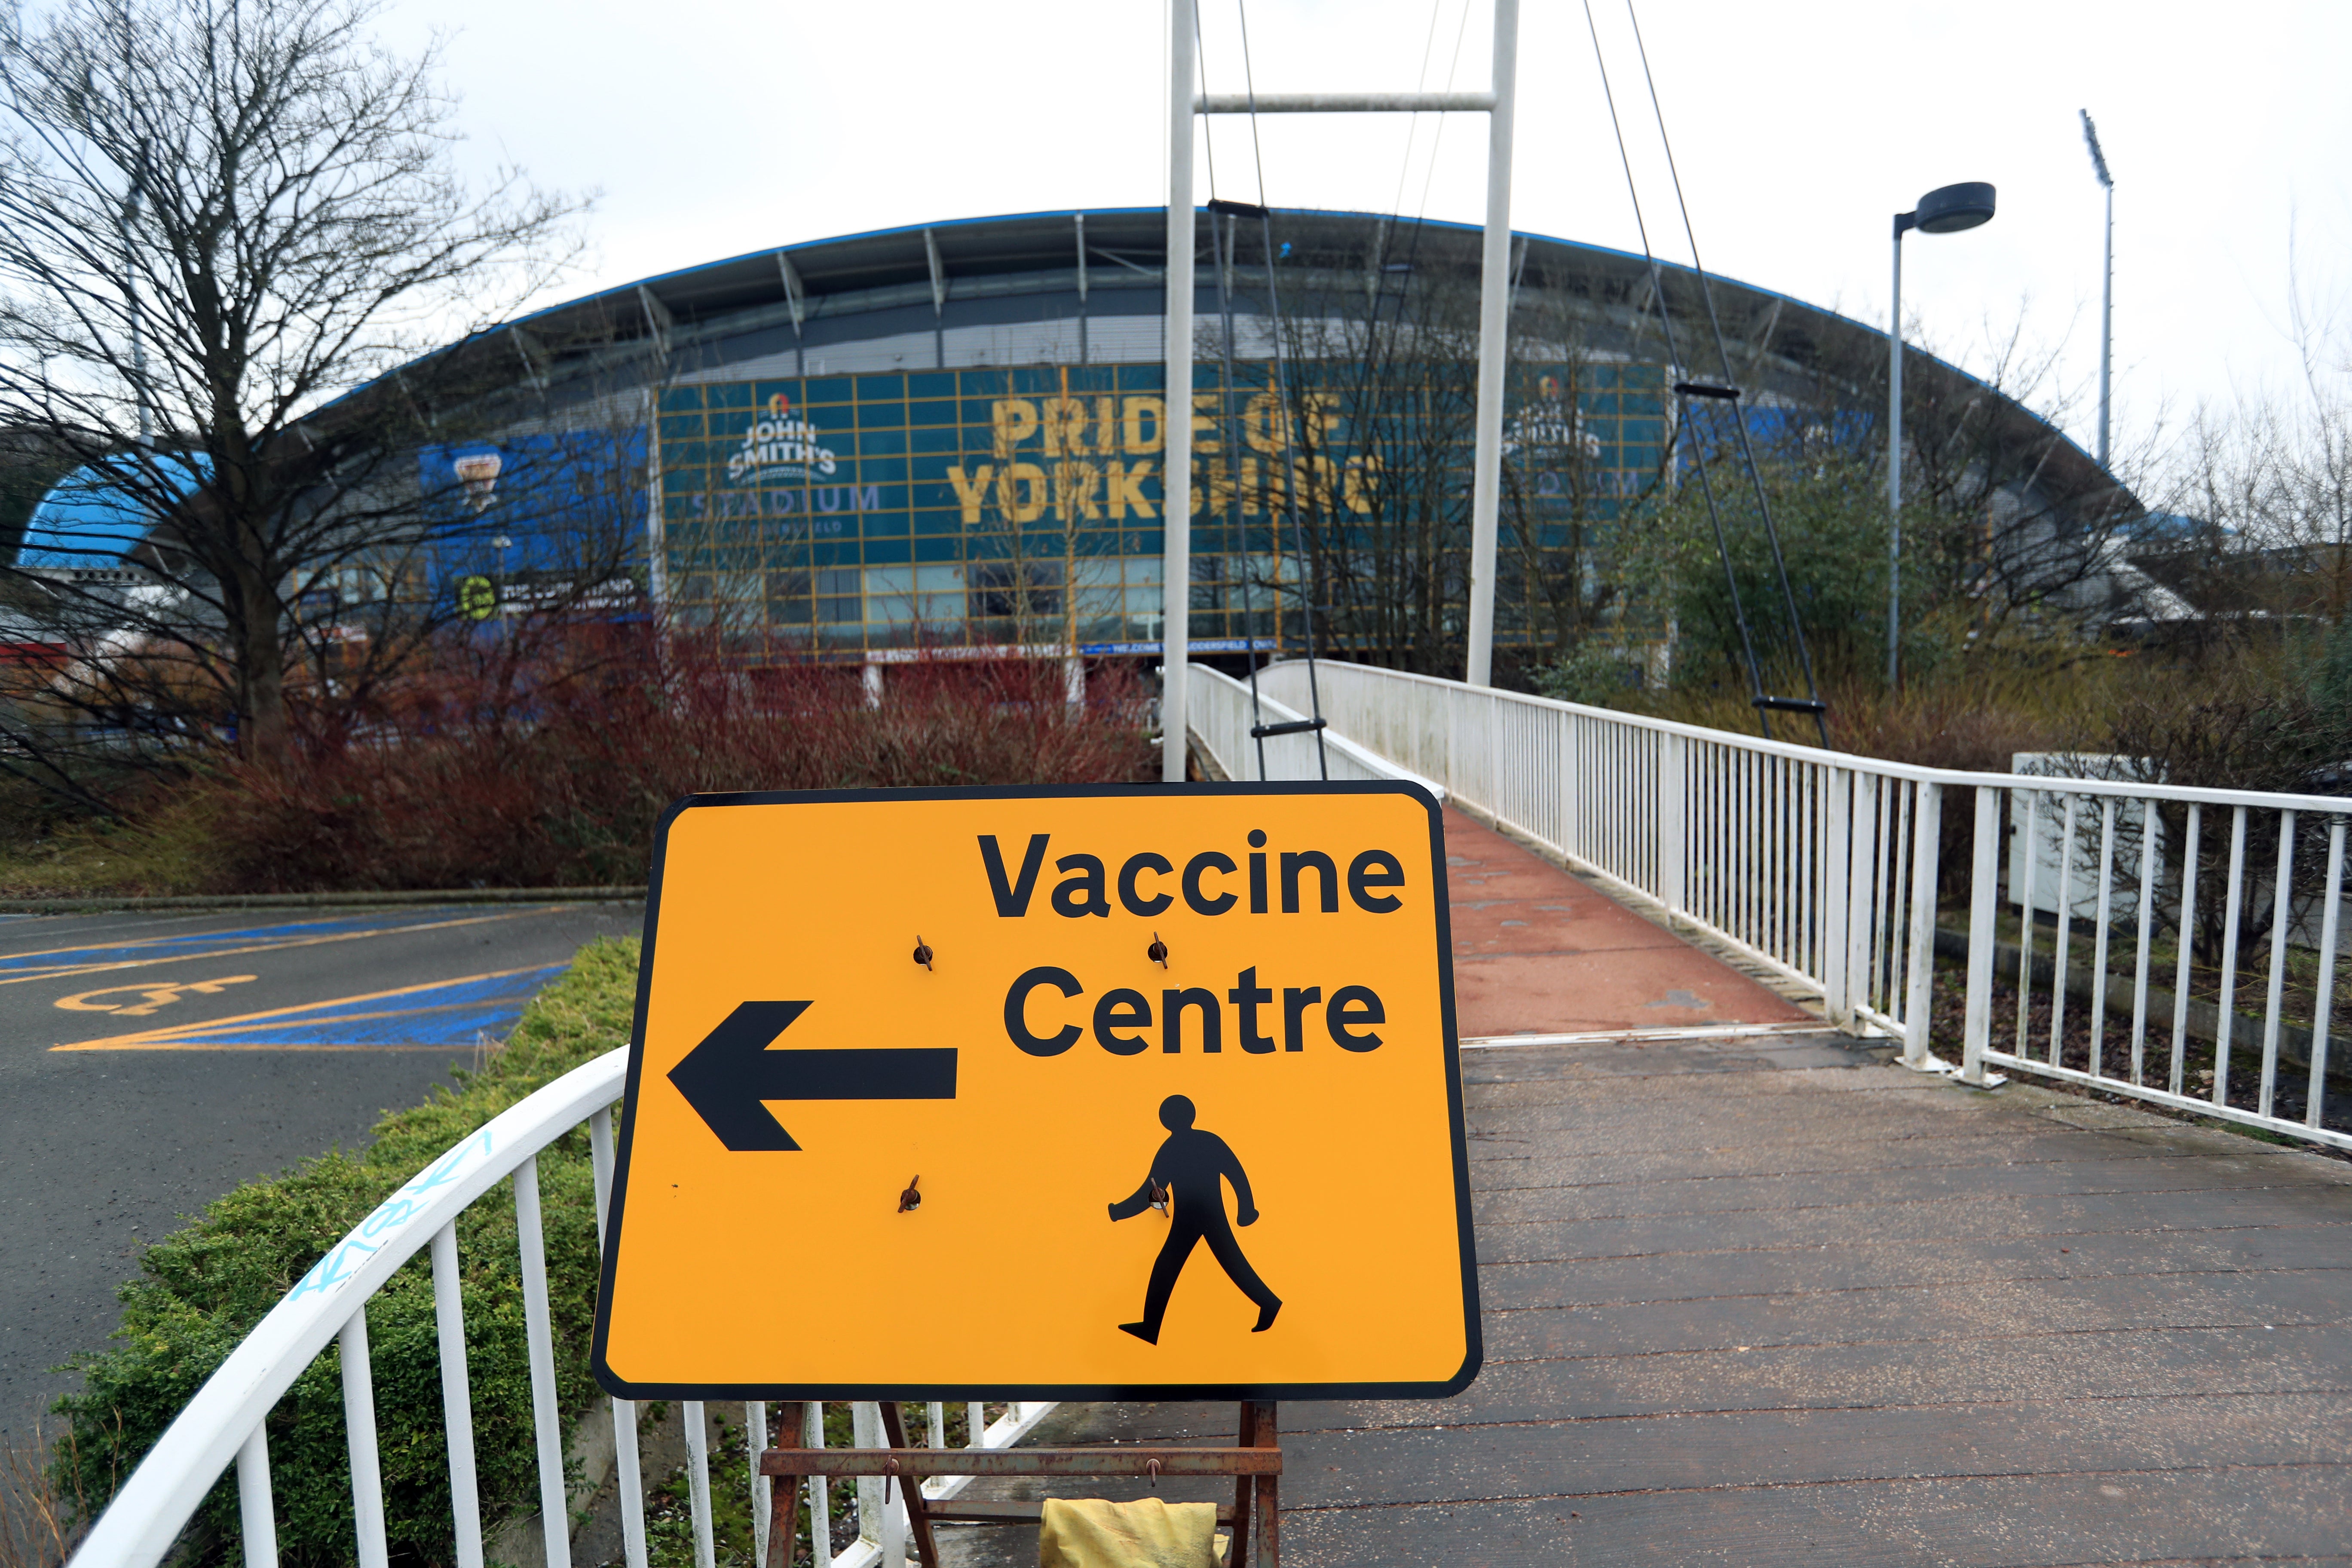 A vaccine centre sign near the John Smith’s Stadium in Huddersfield (Mike Egerton/PA)